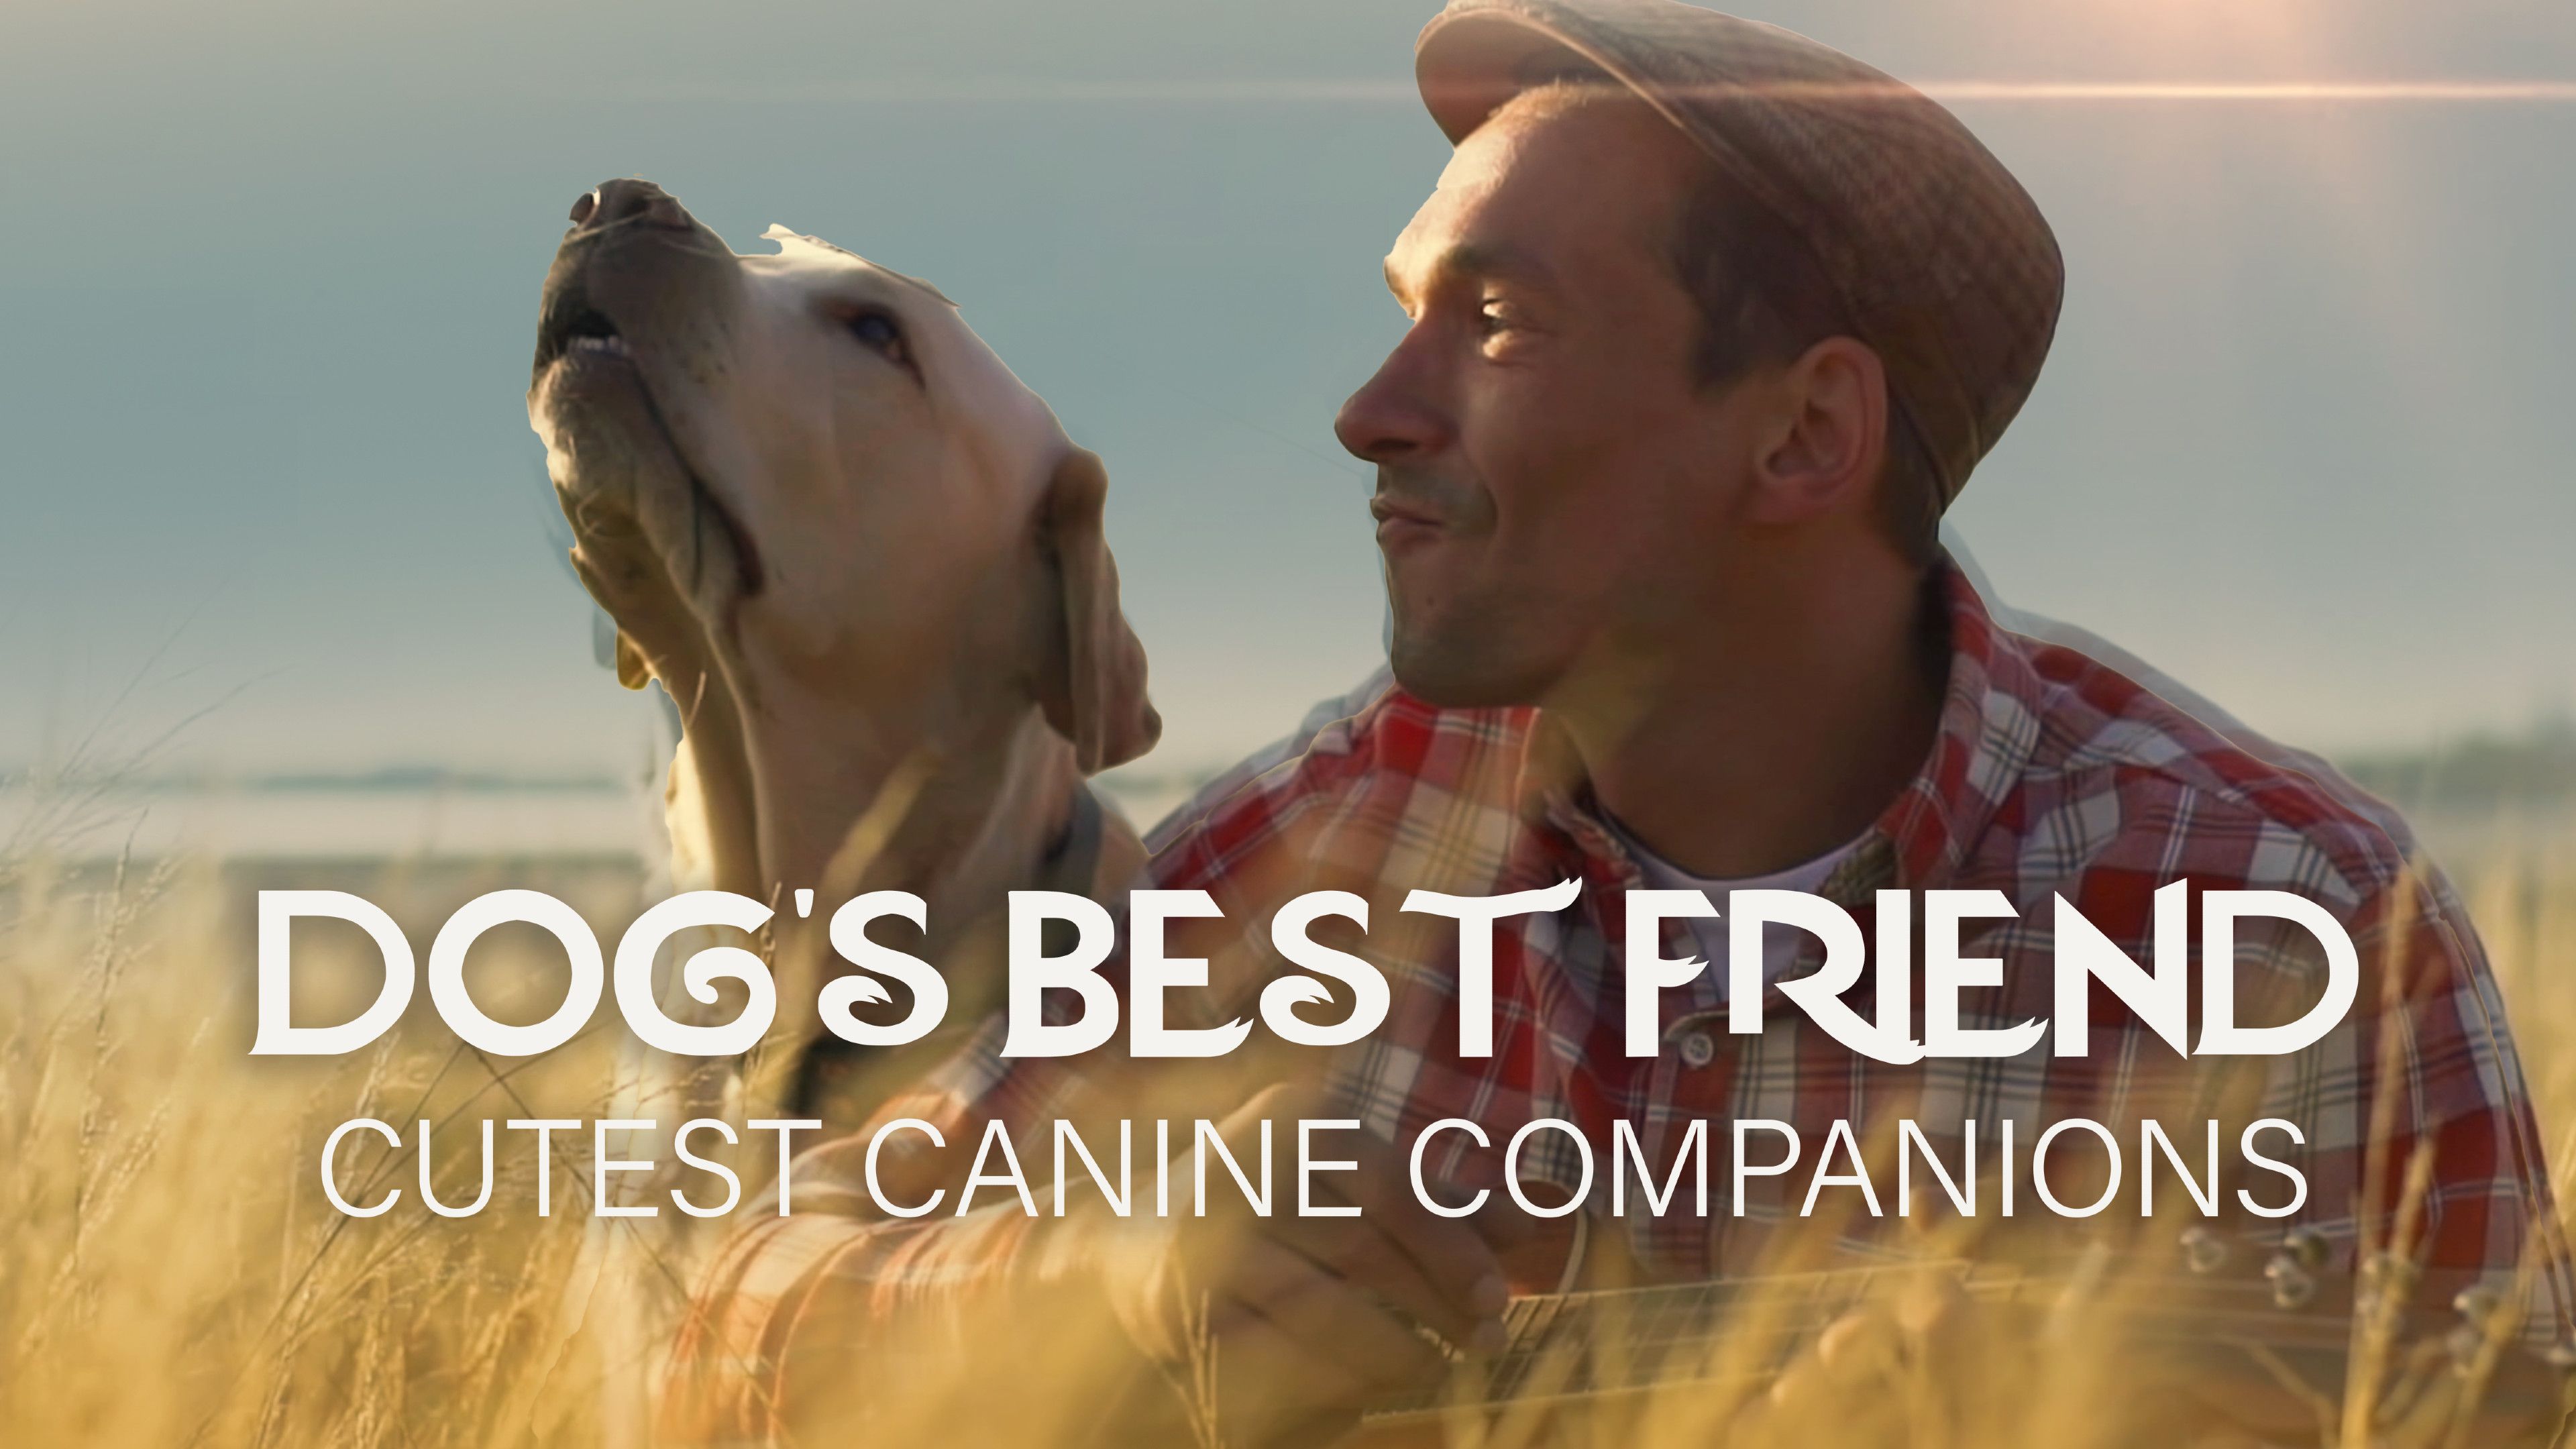 Dog’s Best Friend: Cutest Canine Companions